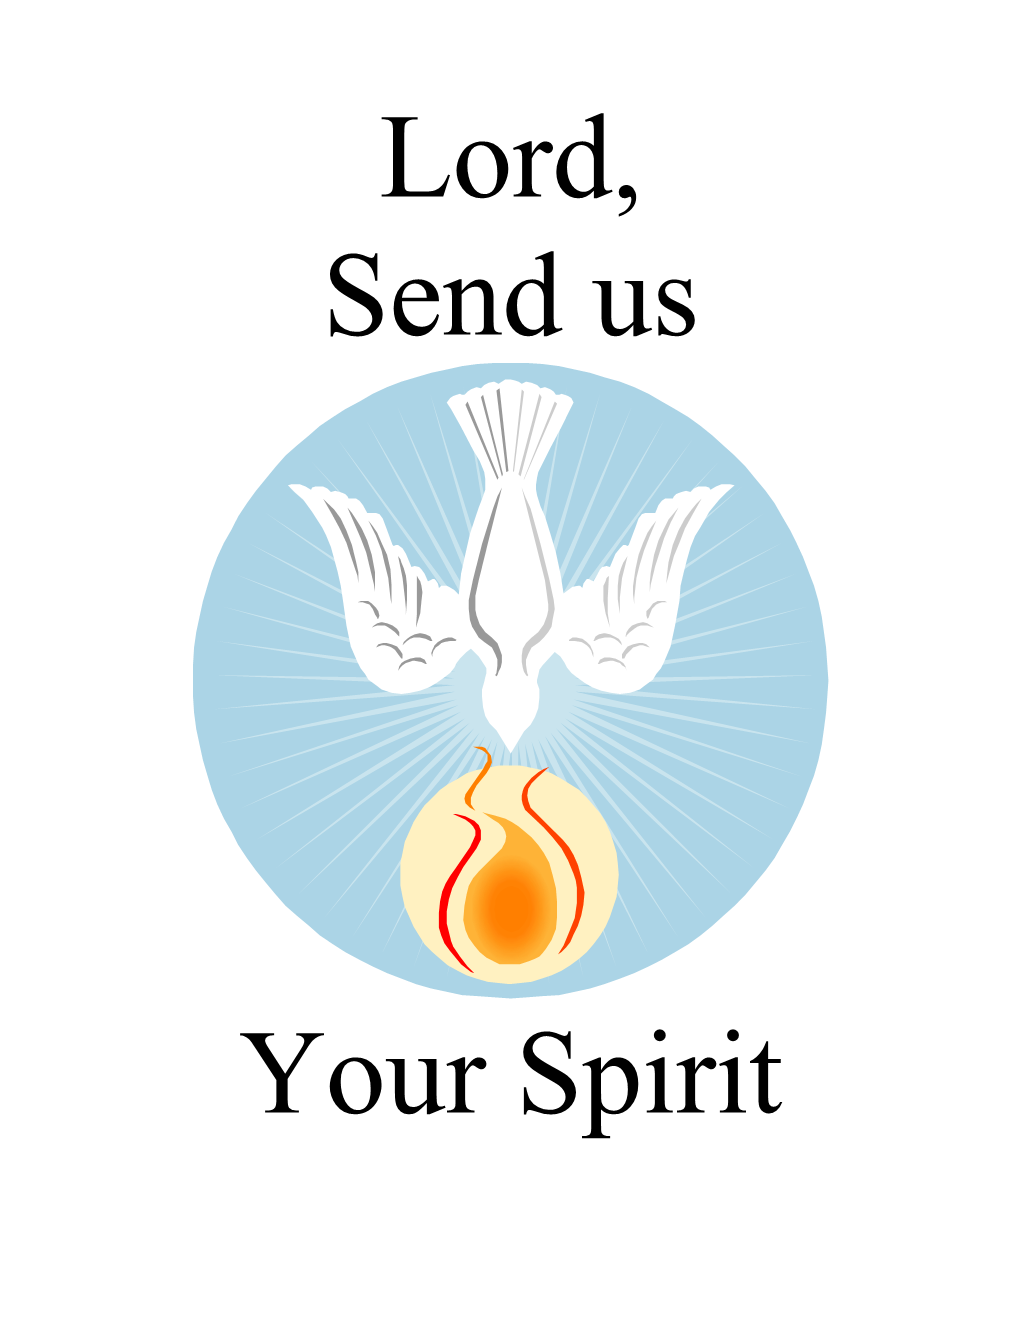 What Are the Gifts of the Holy Spirit?